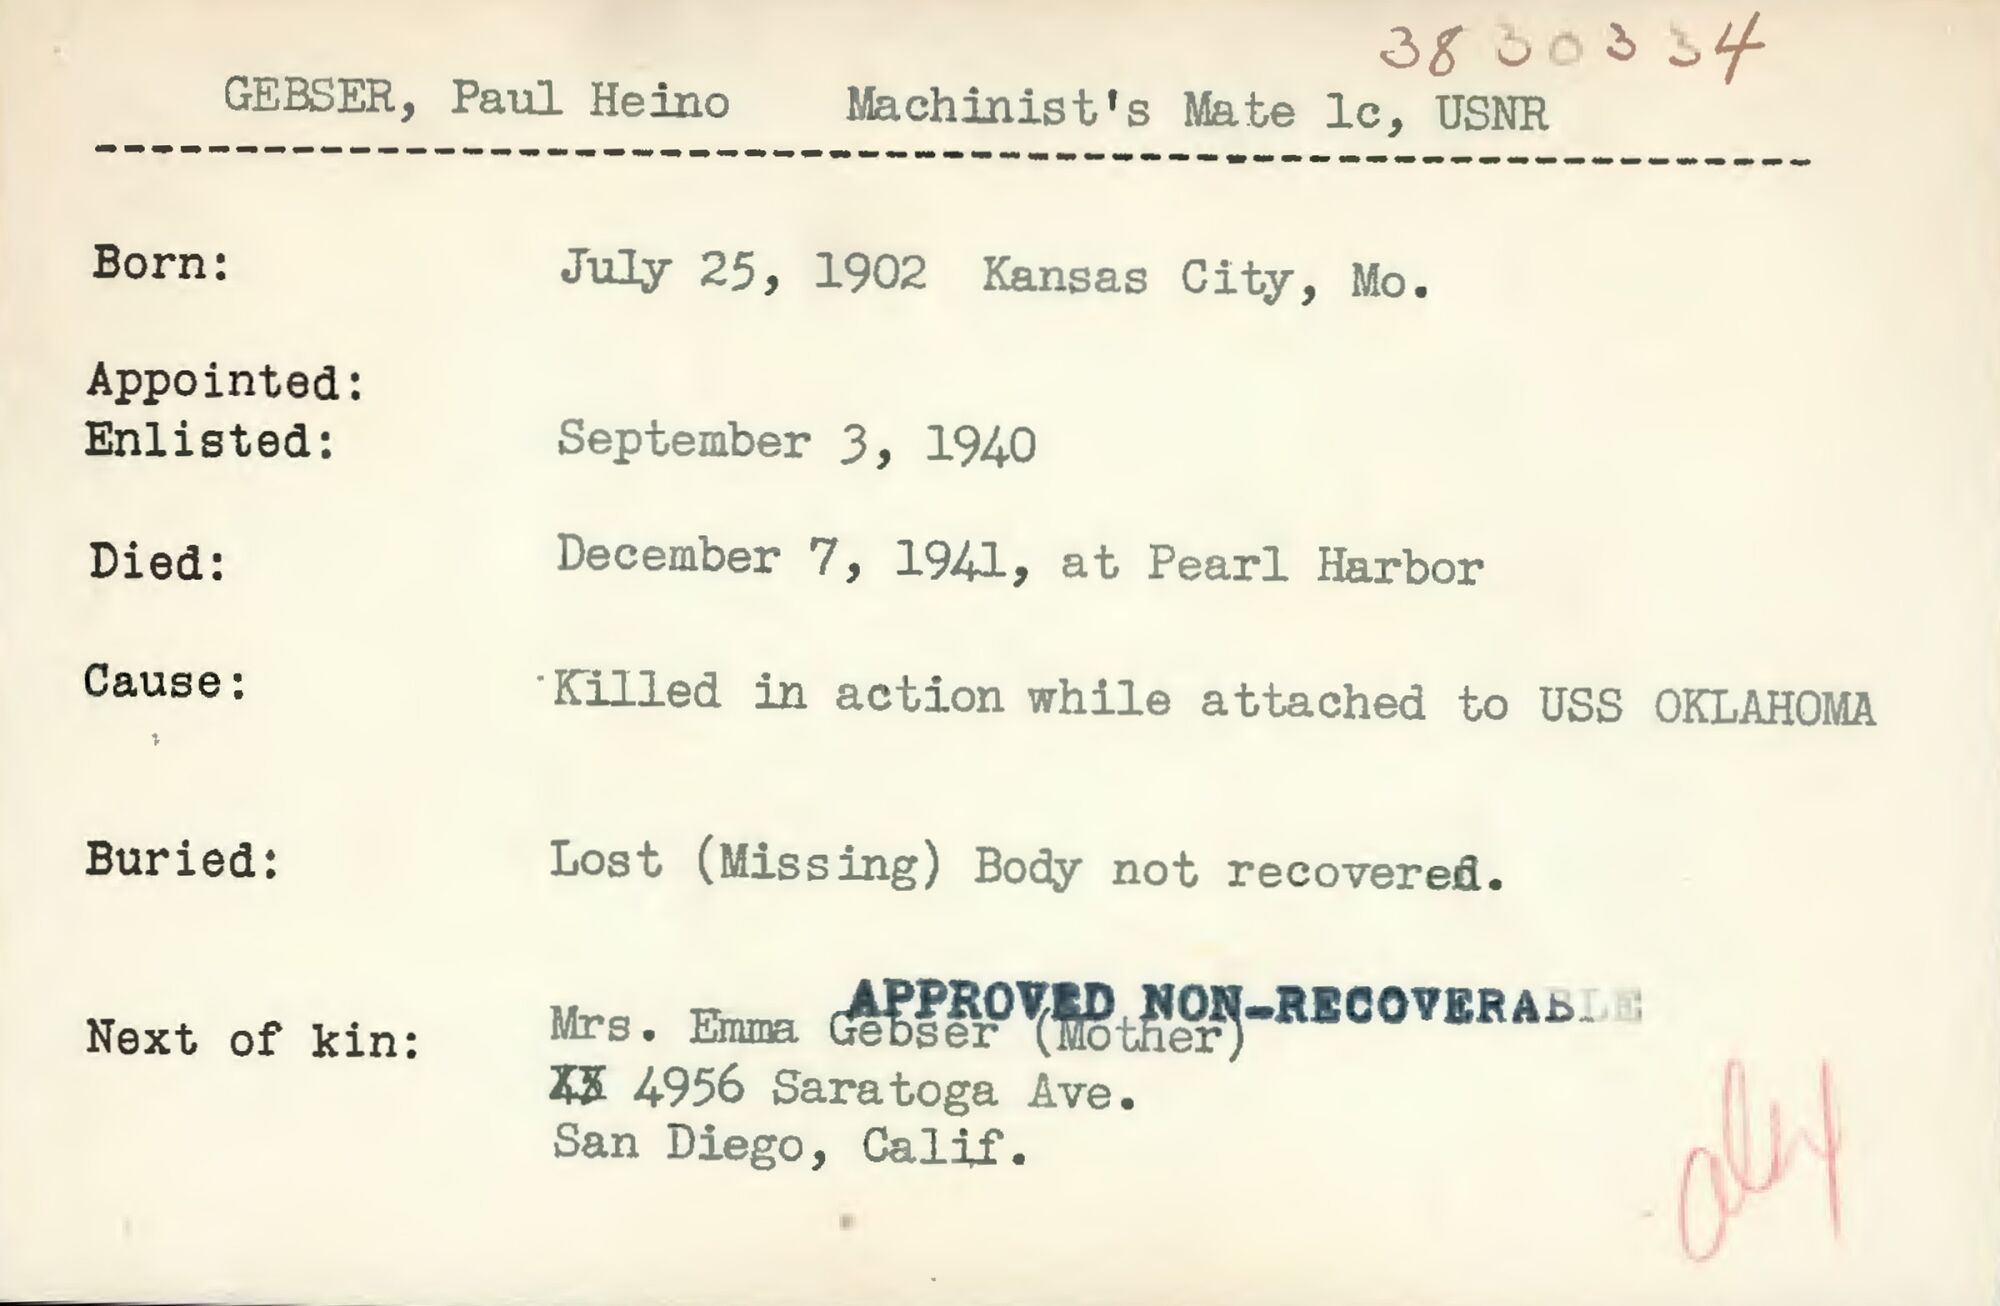 Paul Gebser's Navy file lists his dates of birth, enlistment and death, and says "Body not recovered."